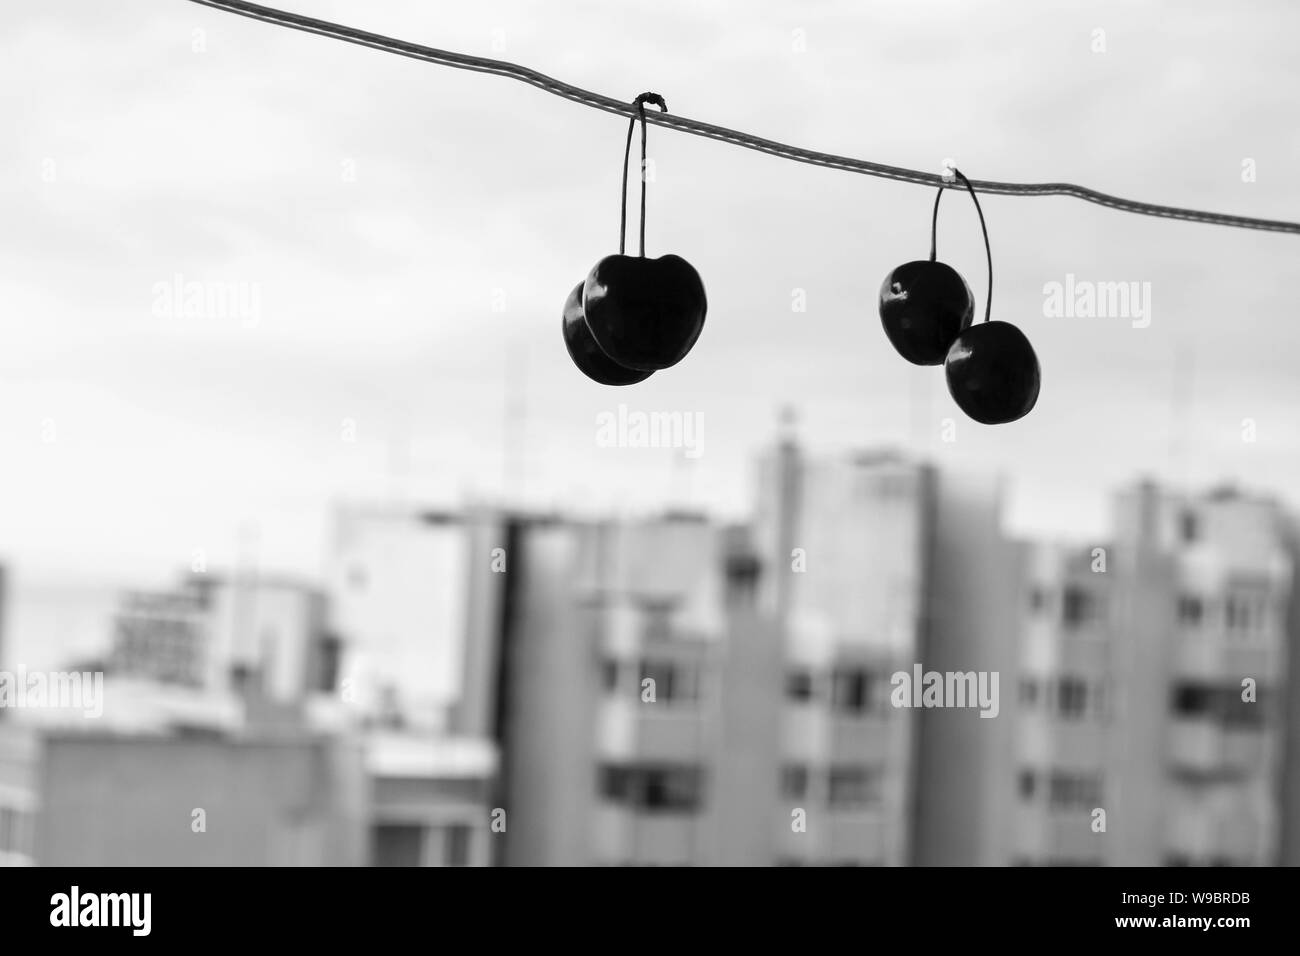 Ripe fresh cherries fruit hanging at clothes line under the sky whit town building in background/ still life Stock Photo